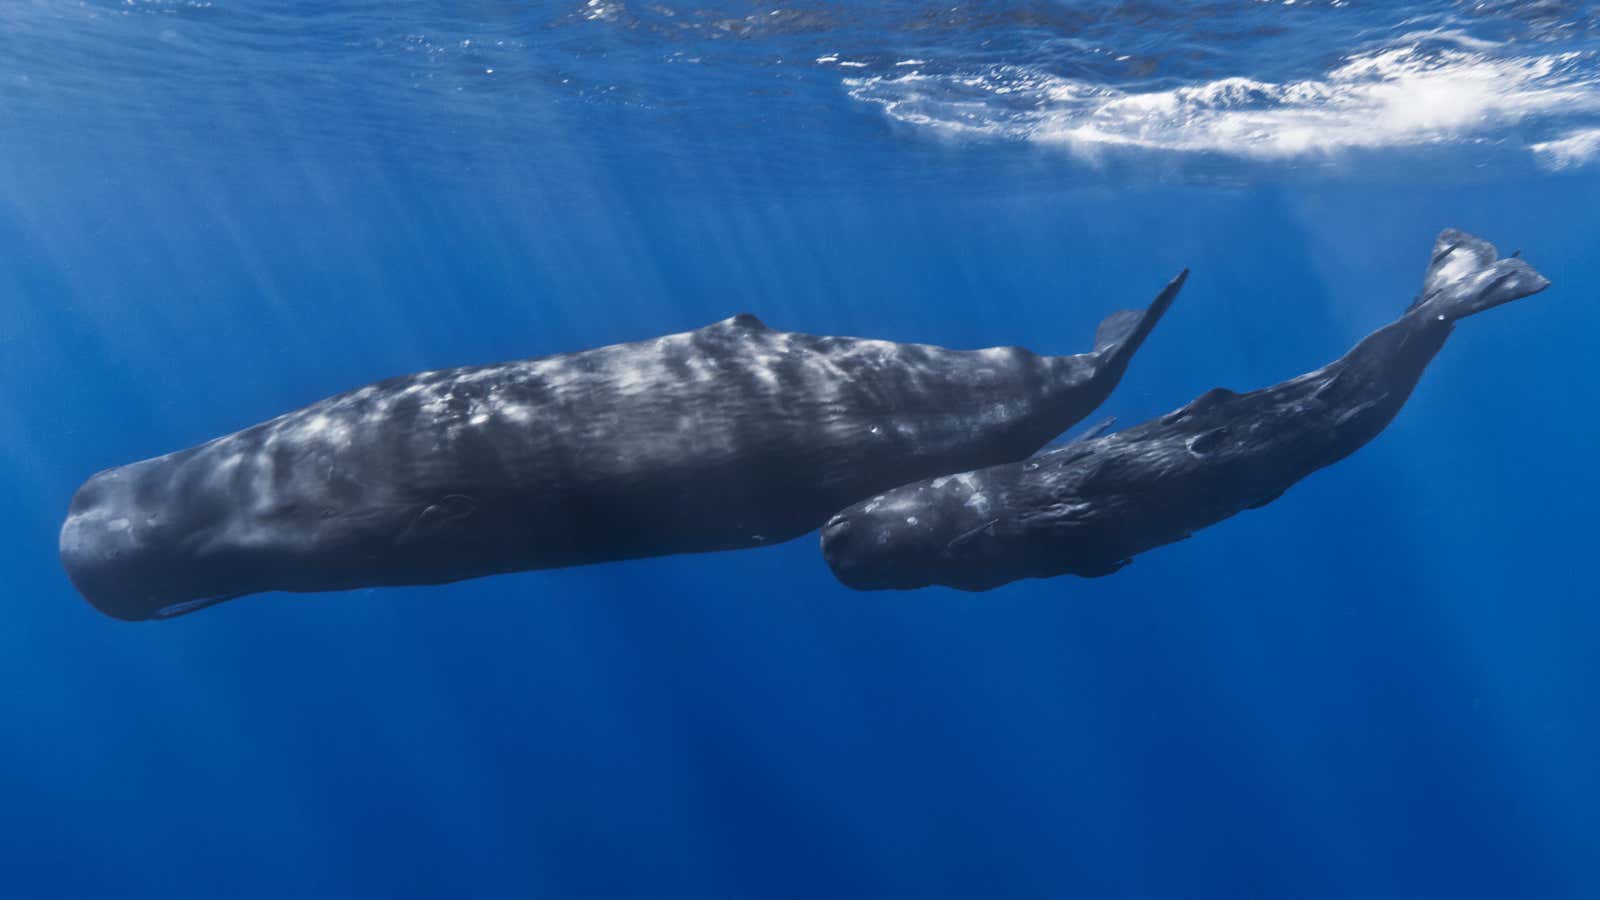 Sperm whales form clans with distinct cultures and dialects